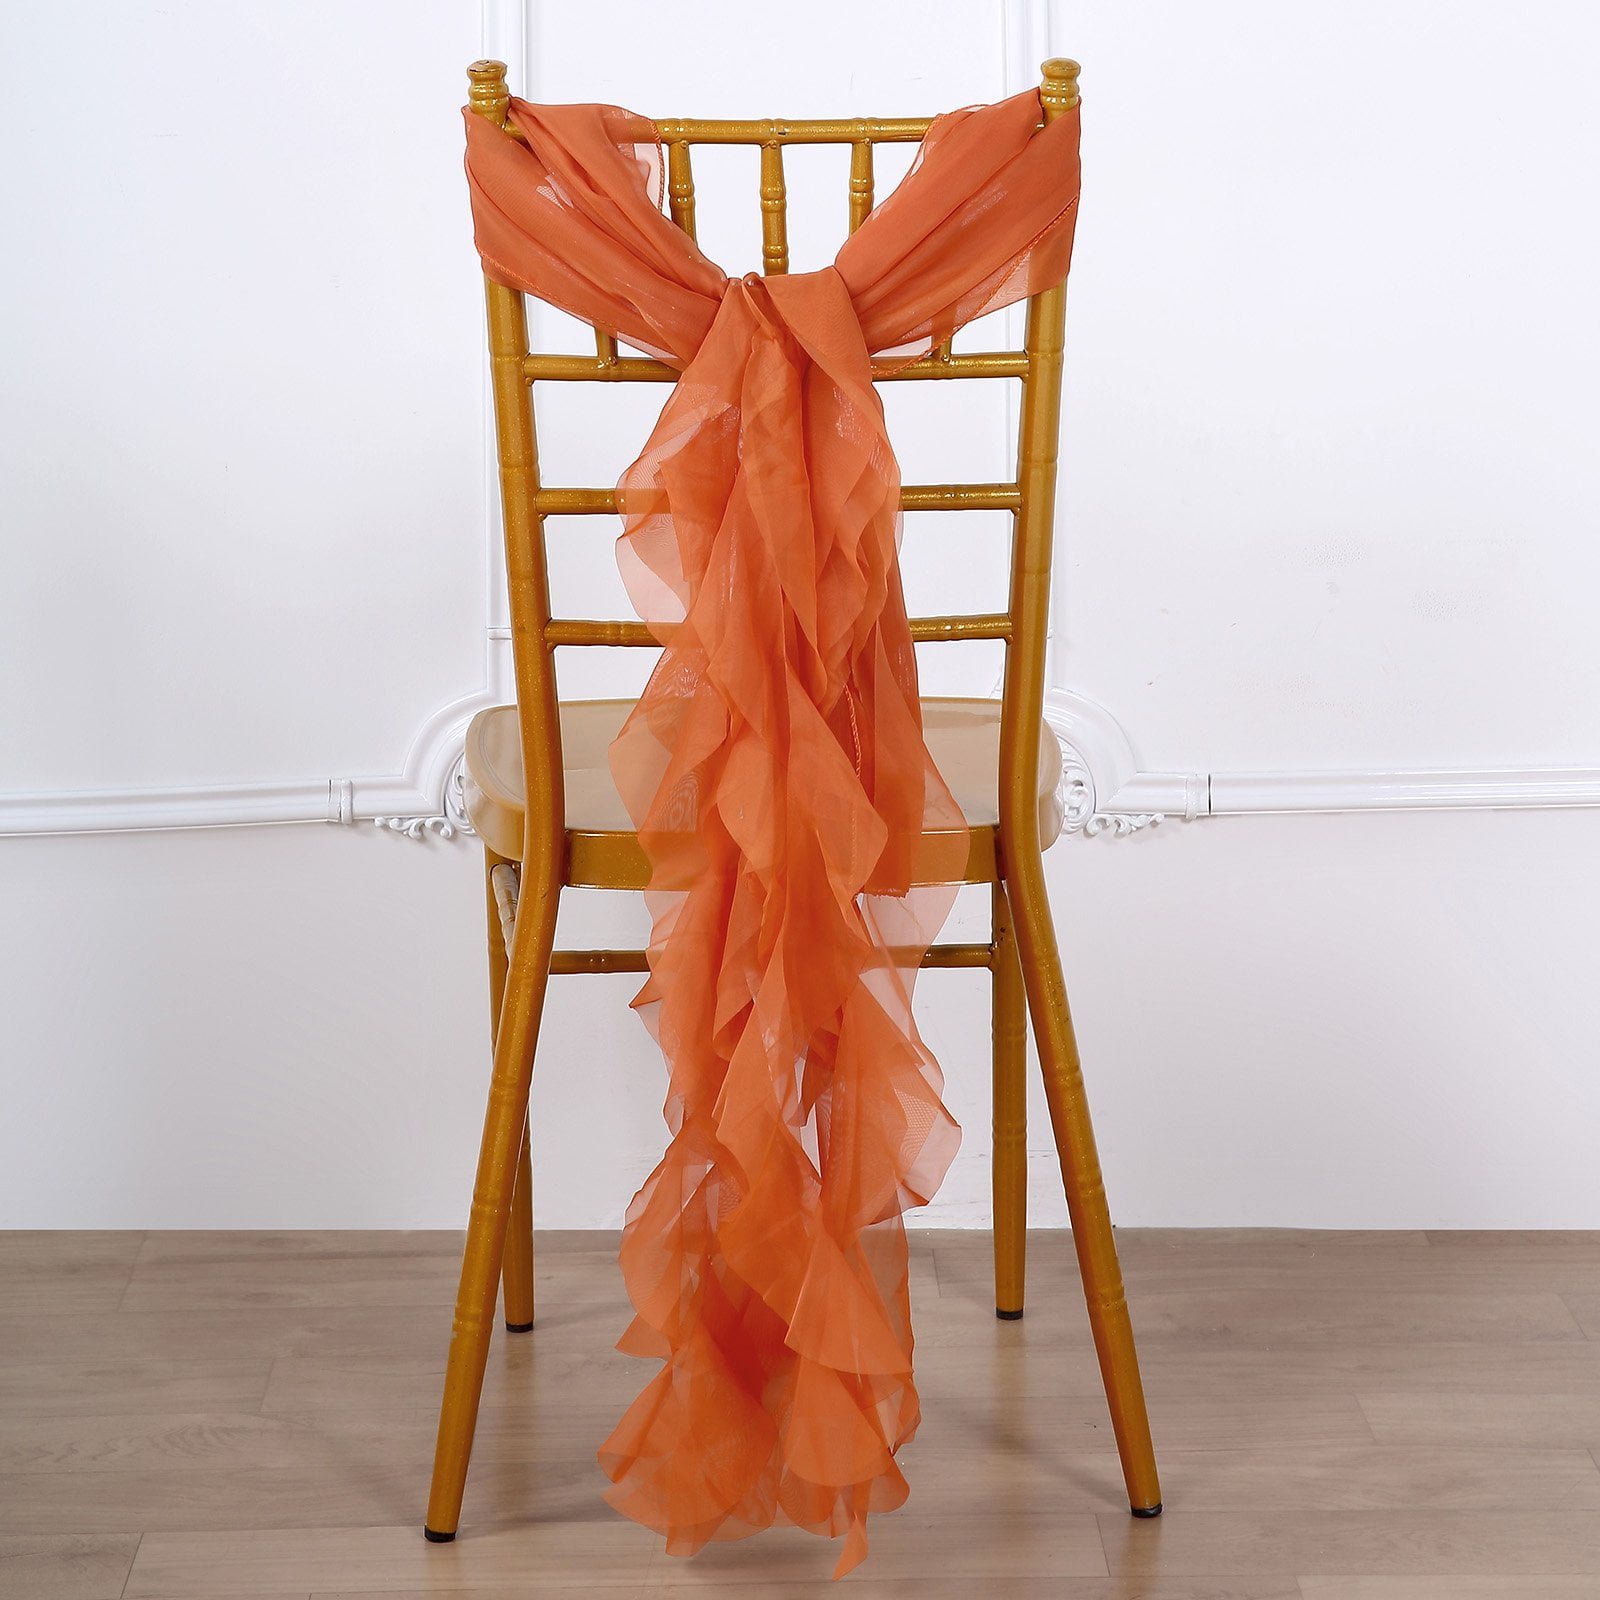 Efavormart 1 Set Burnt Orange Chiffon Hoods With Ruffles Willow Chiffon Chair Sashes for Wedding Banquet Party Supplies Decoration Chair Cover Sash Band Reception